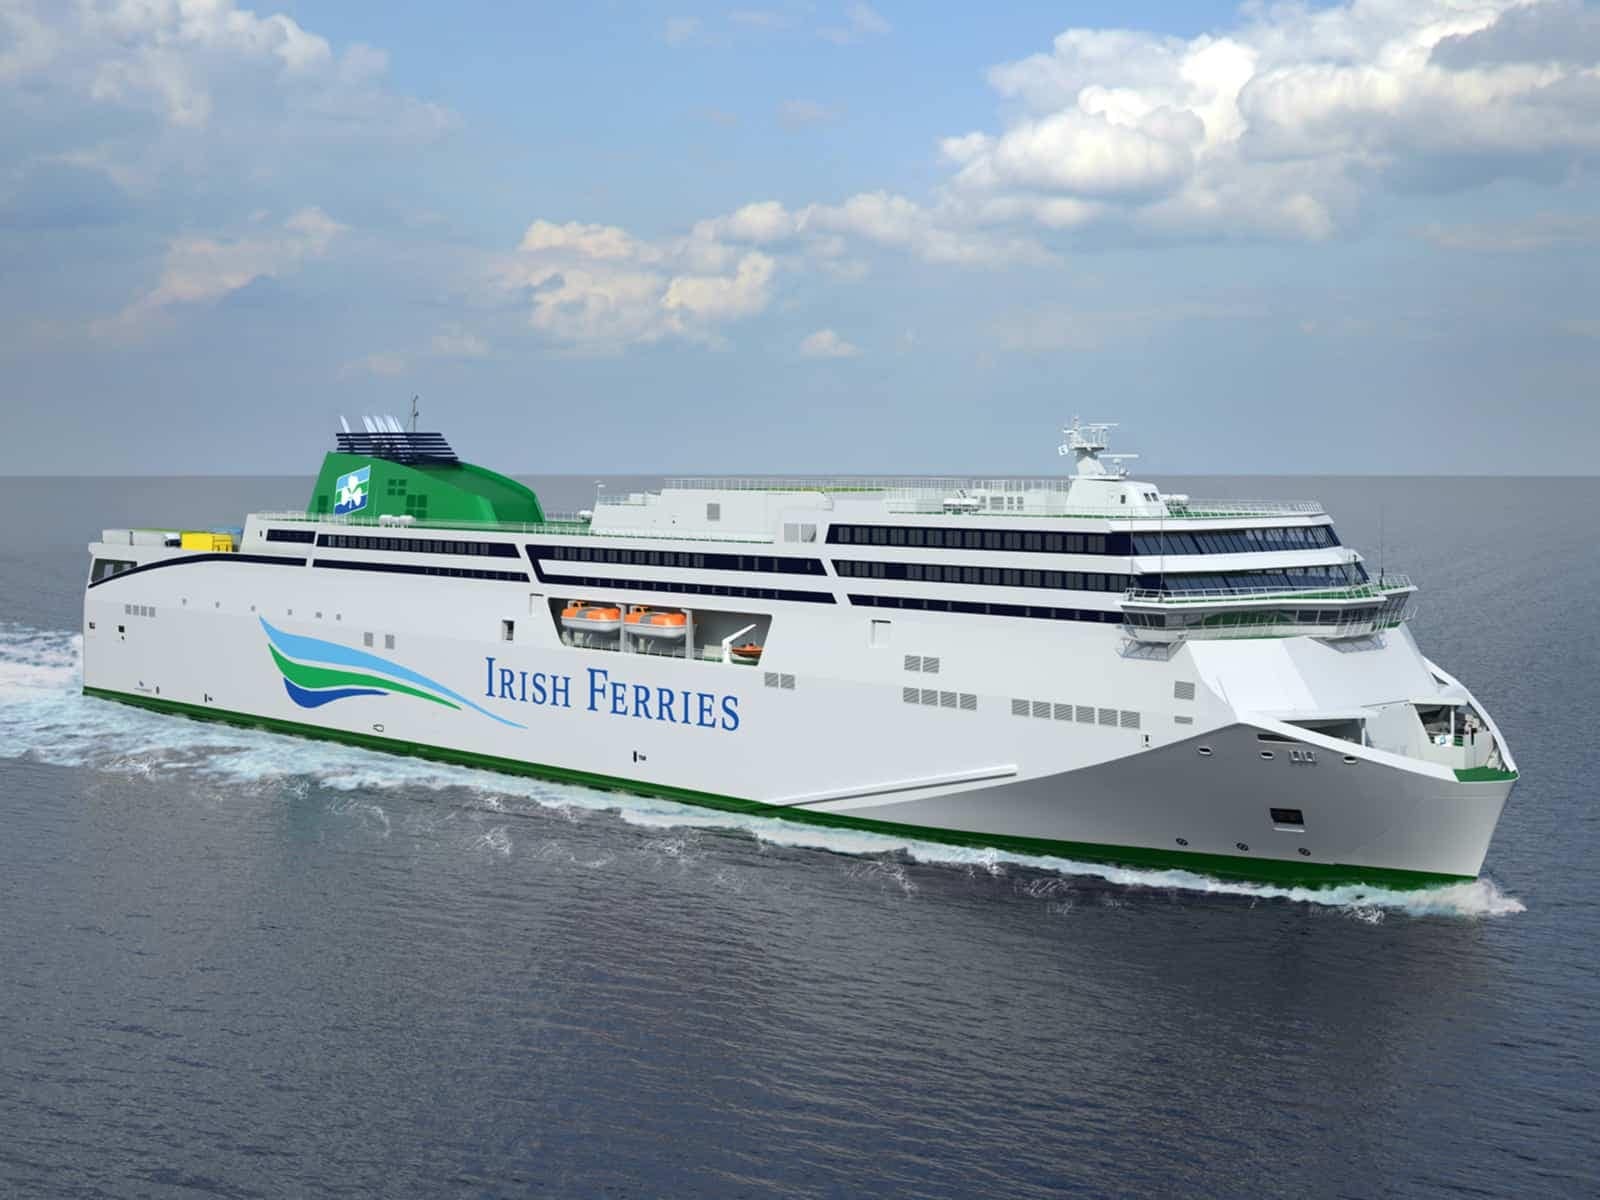 Rendering of Irish Ferries currently unnamed second FSG new-build ferry. When ordered she was expected to enter service on the Dublin - Holyhead route in mid-2020. Irish Ferries